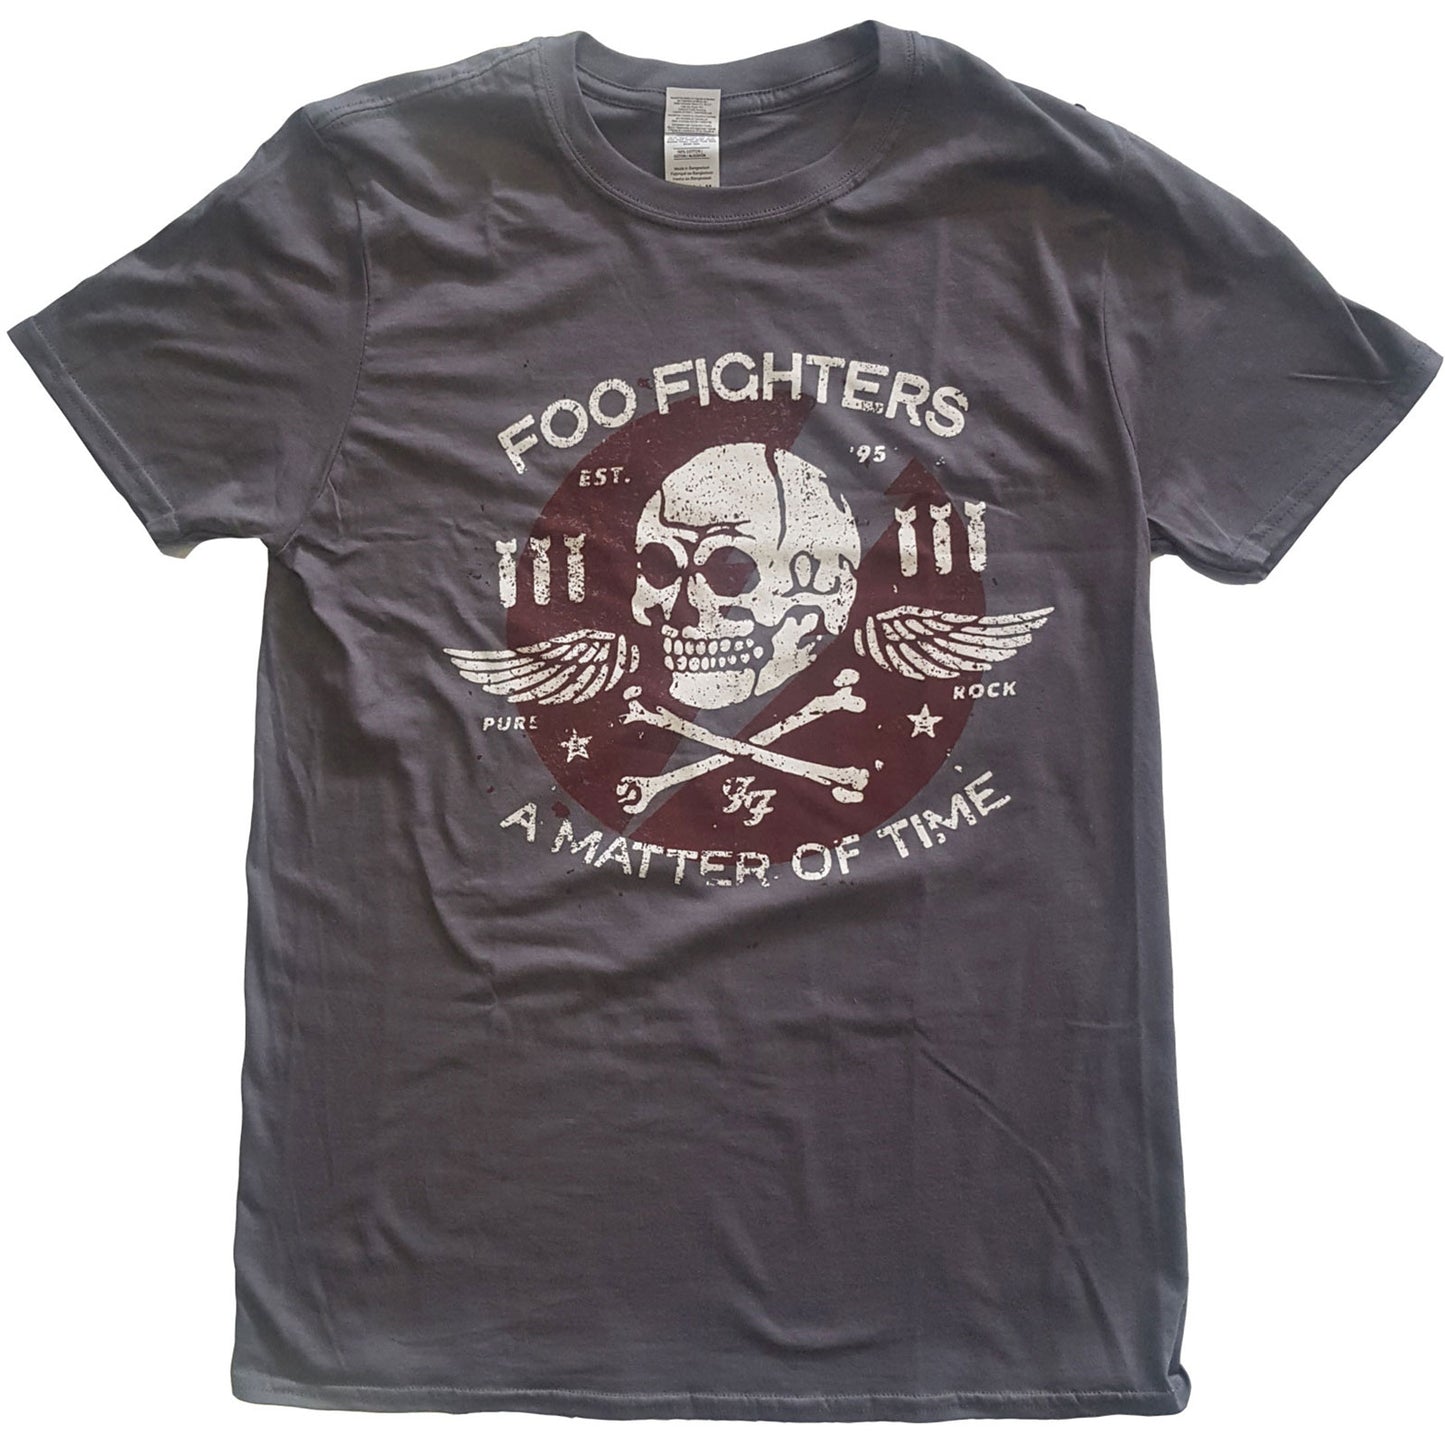 Foo Fighters T-Shirt: Matter of Time